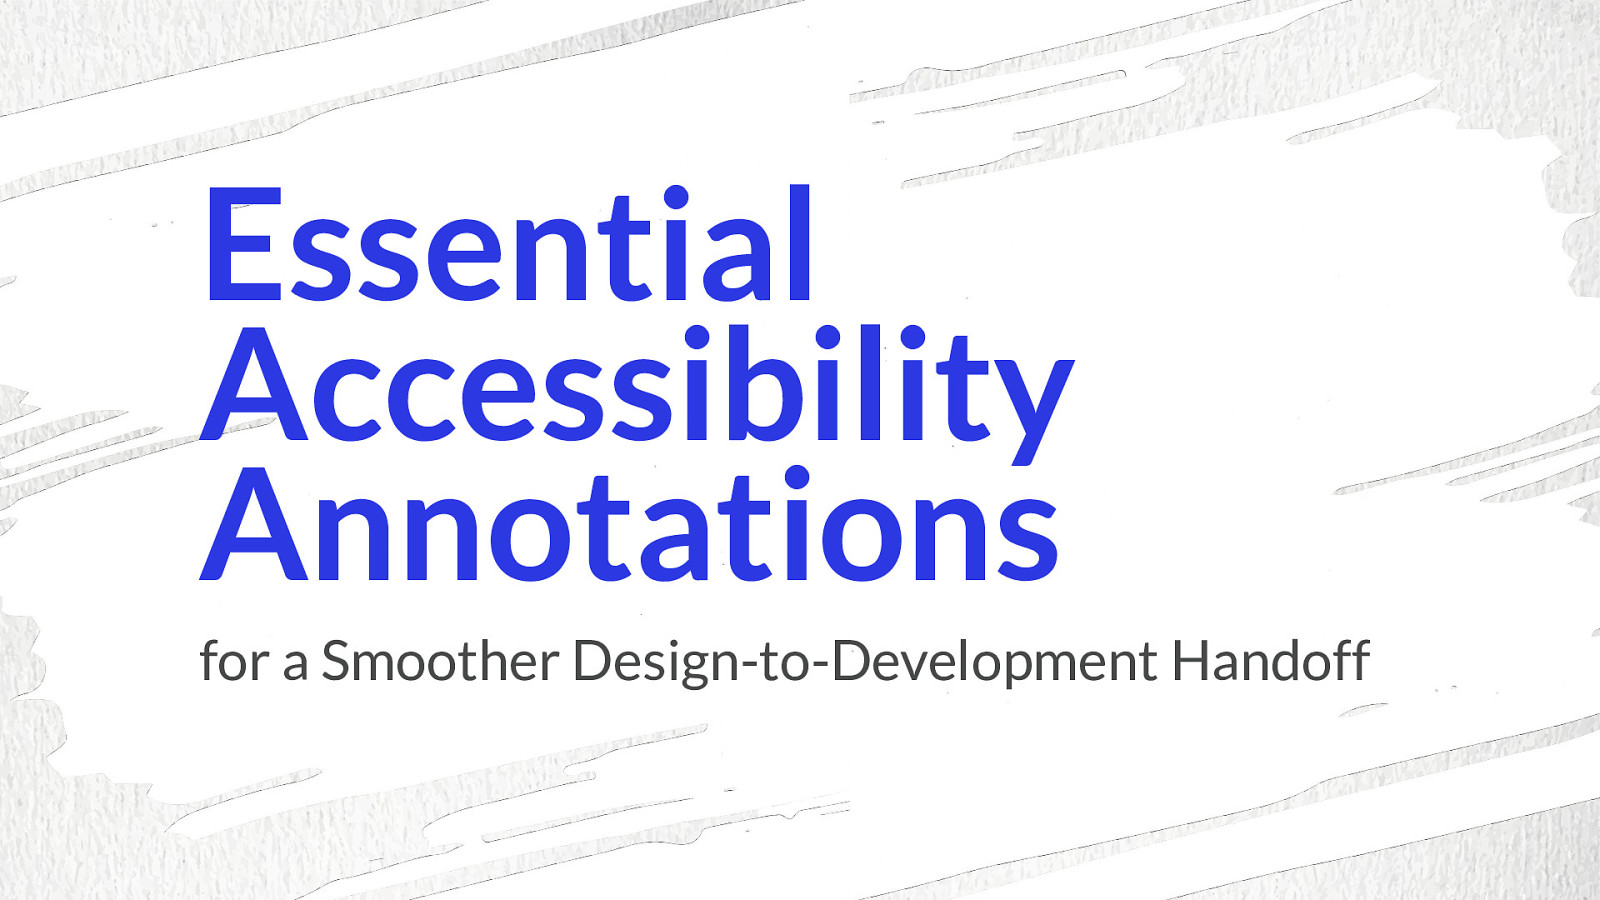 Essential Accessibility Annotations for a Smoother Design-to-Development Handoff